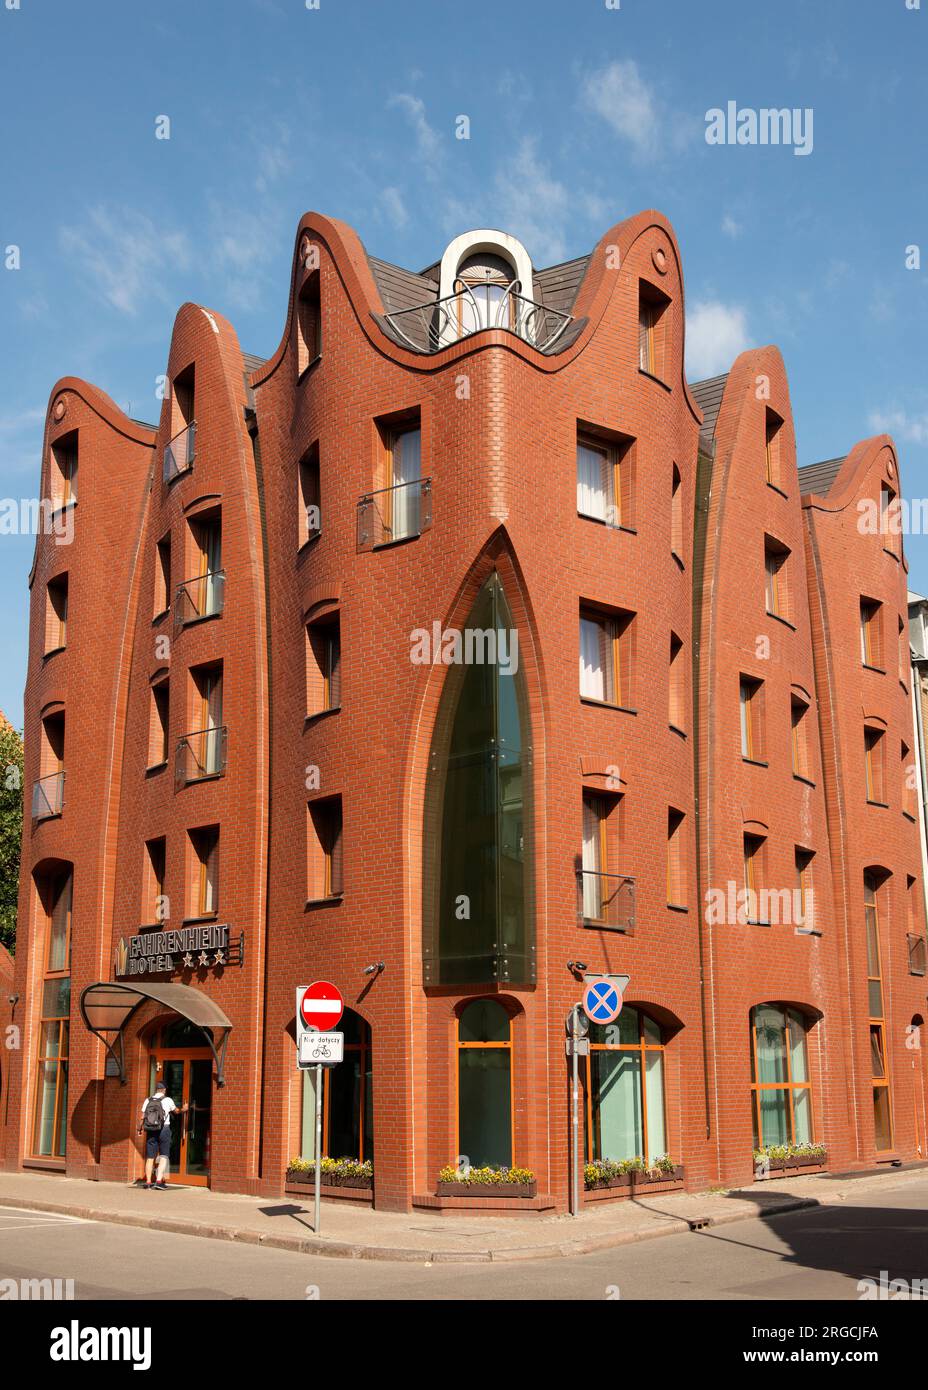 Fahrenheit Hotel unusual curved building in Grodzka Street, Old Town of Gdansk, Poland, Europe, EU Stock Photo